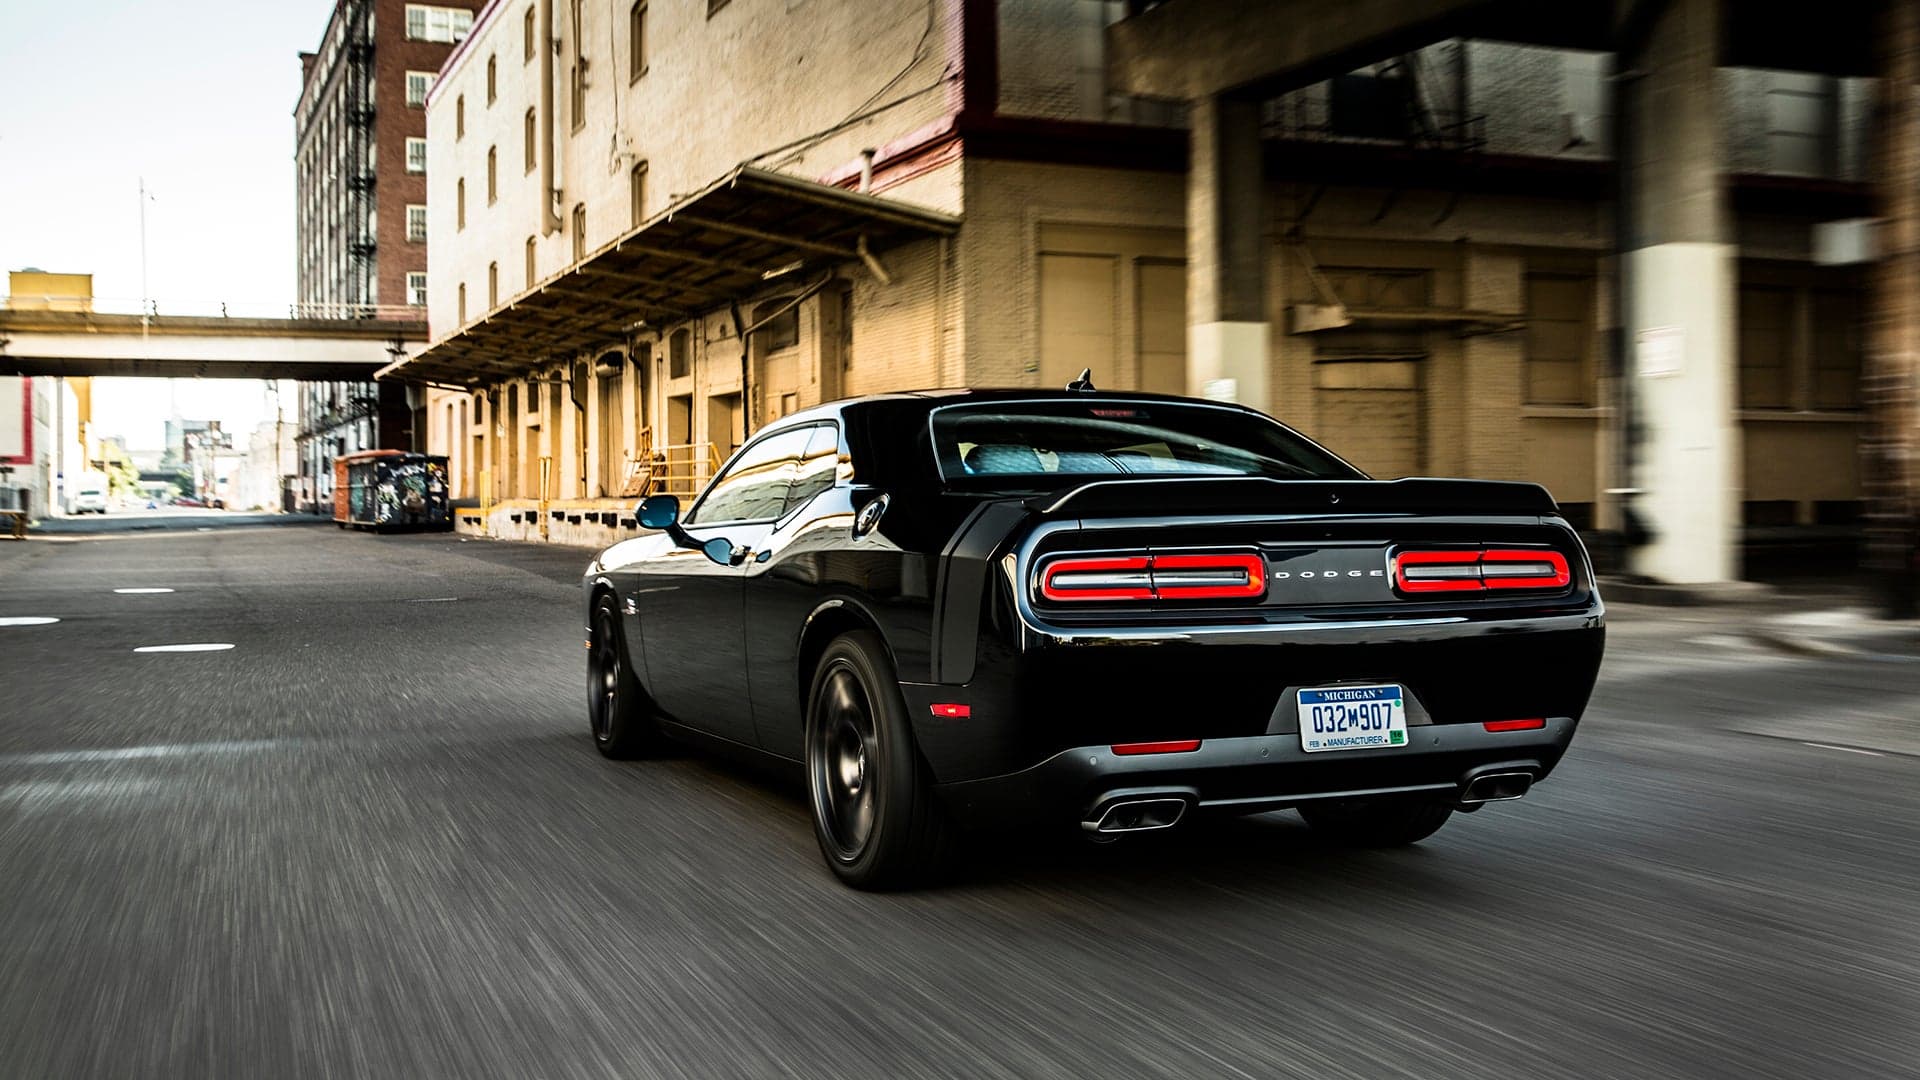 Dodge Challenger Driver Arrested For Doing 145 MPH, Flipping Off Tokyo Speed Cameras